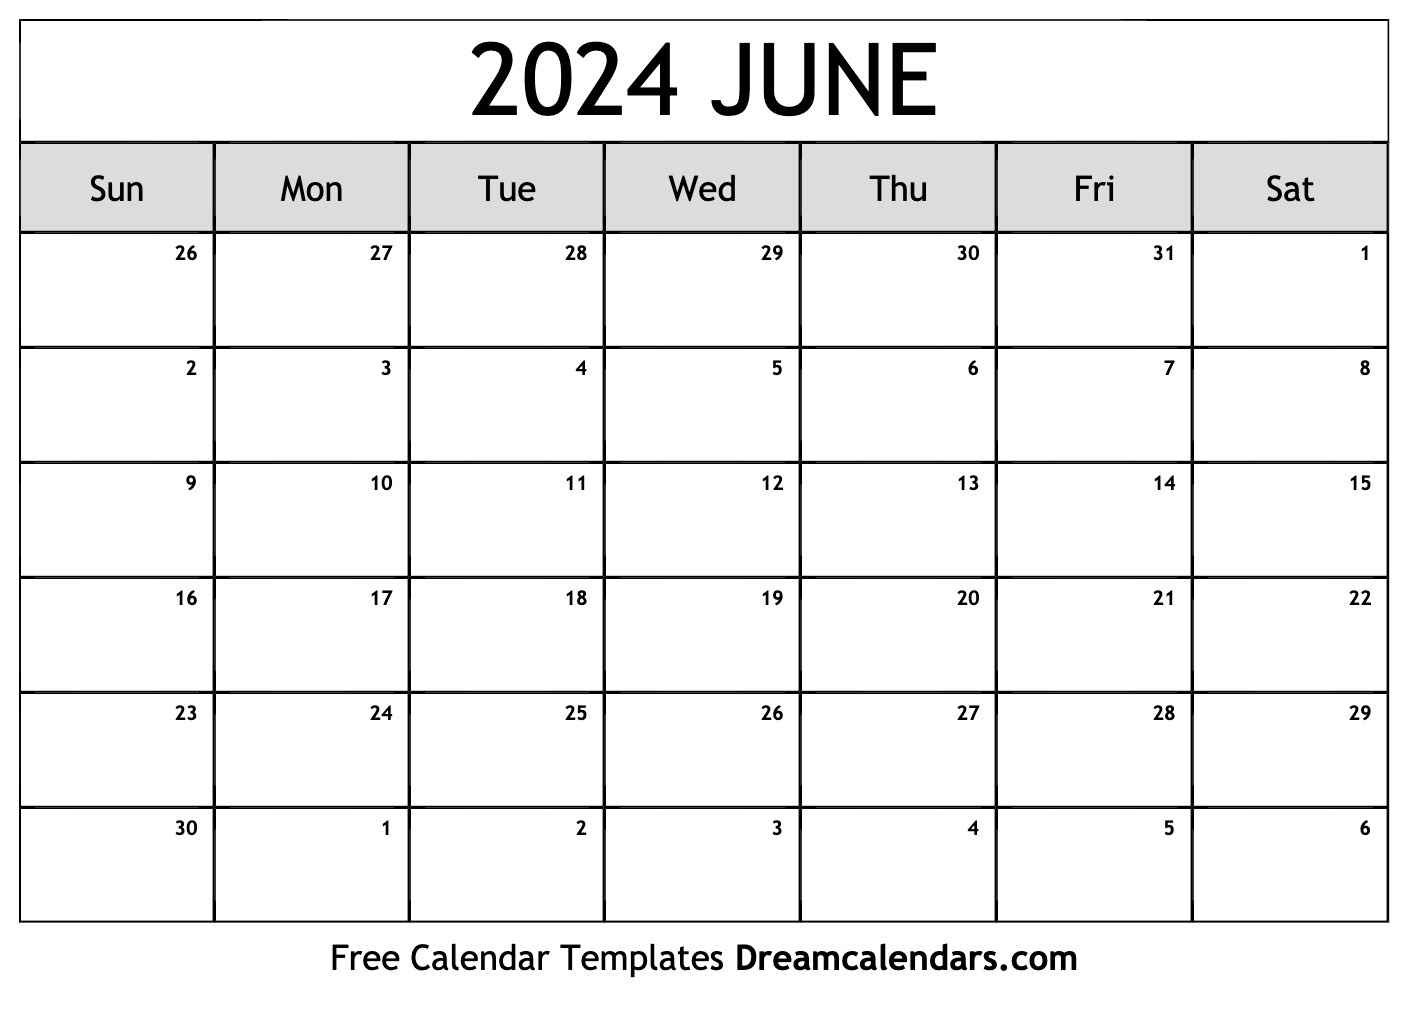 June 2024 Calendar - Free Printable With Holidays And Observances for What Number Is June On The Calendar 2024